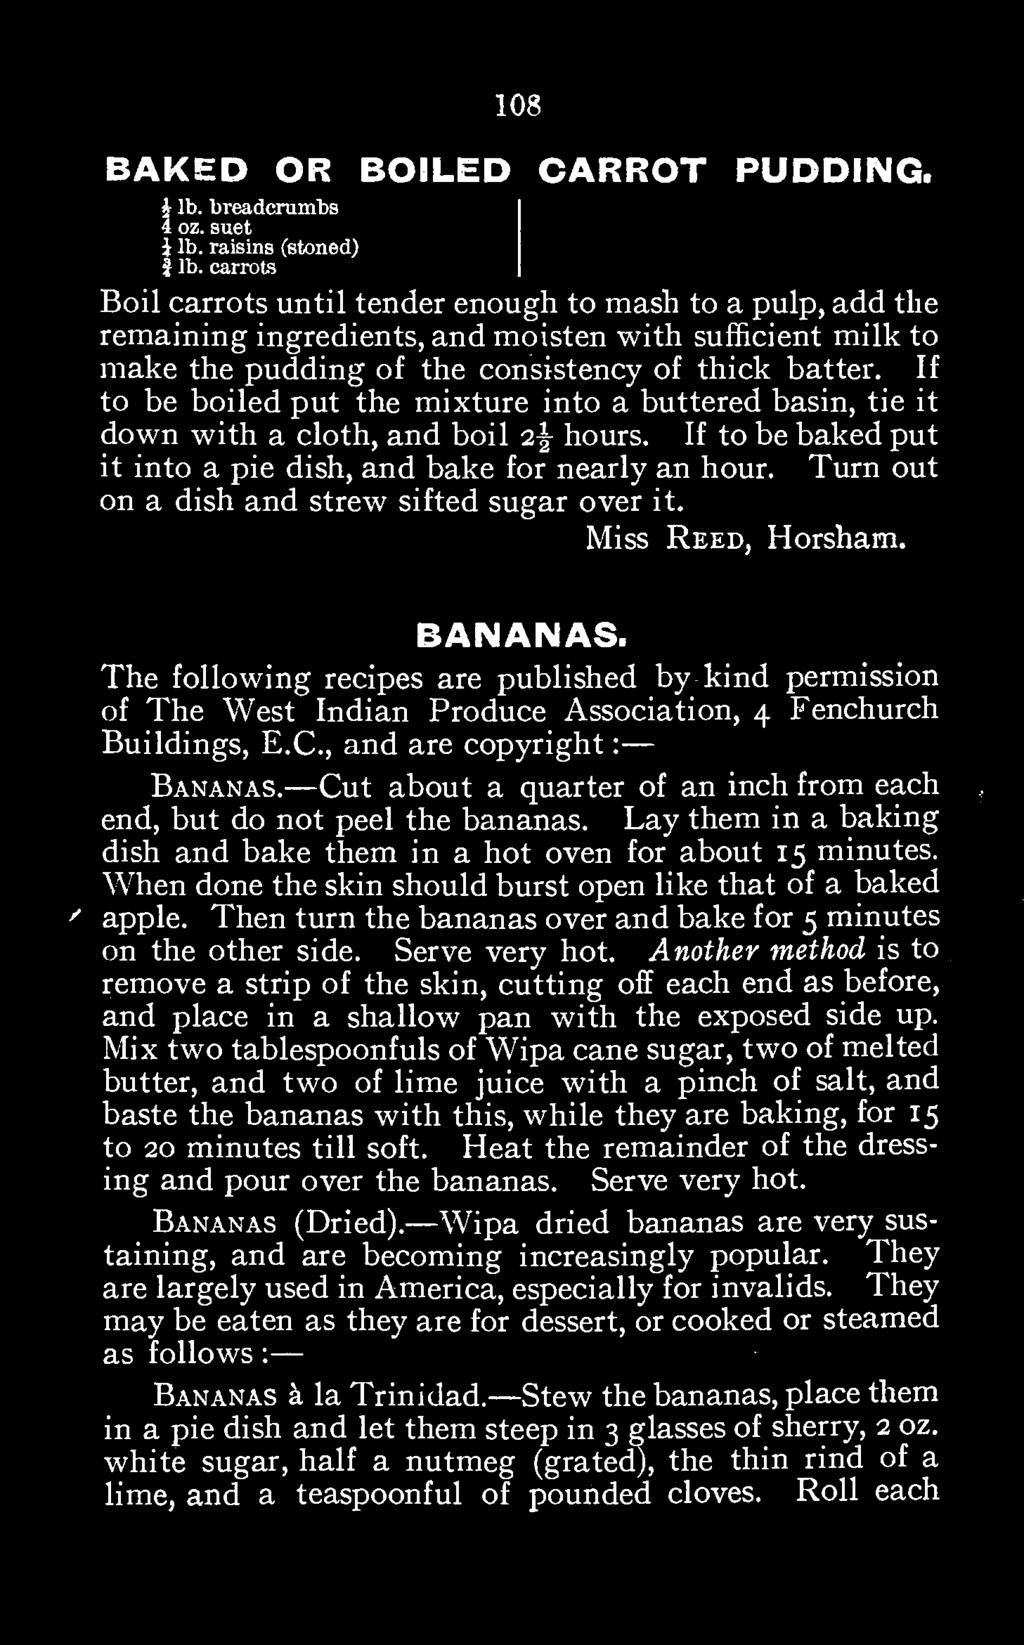 C., and are copyright: Bananas. Cut about a quarter of an inch from each end, but do not peel the bananas. Lay them in a baking dish and bake them in a hot oven for about 15 minutes.